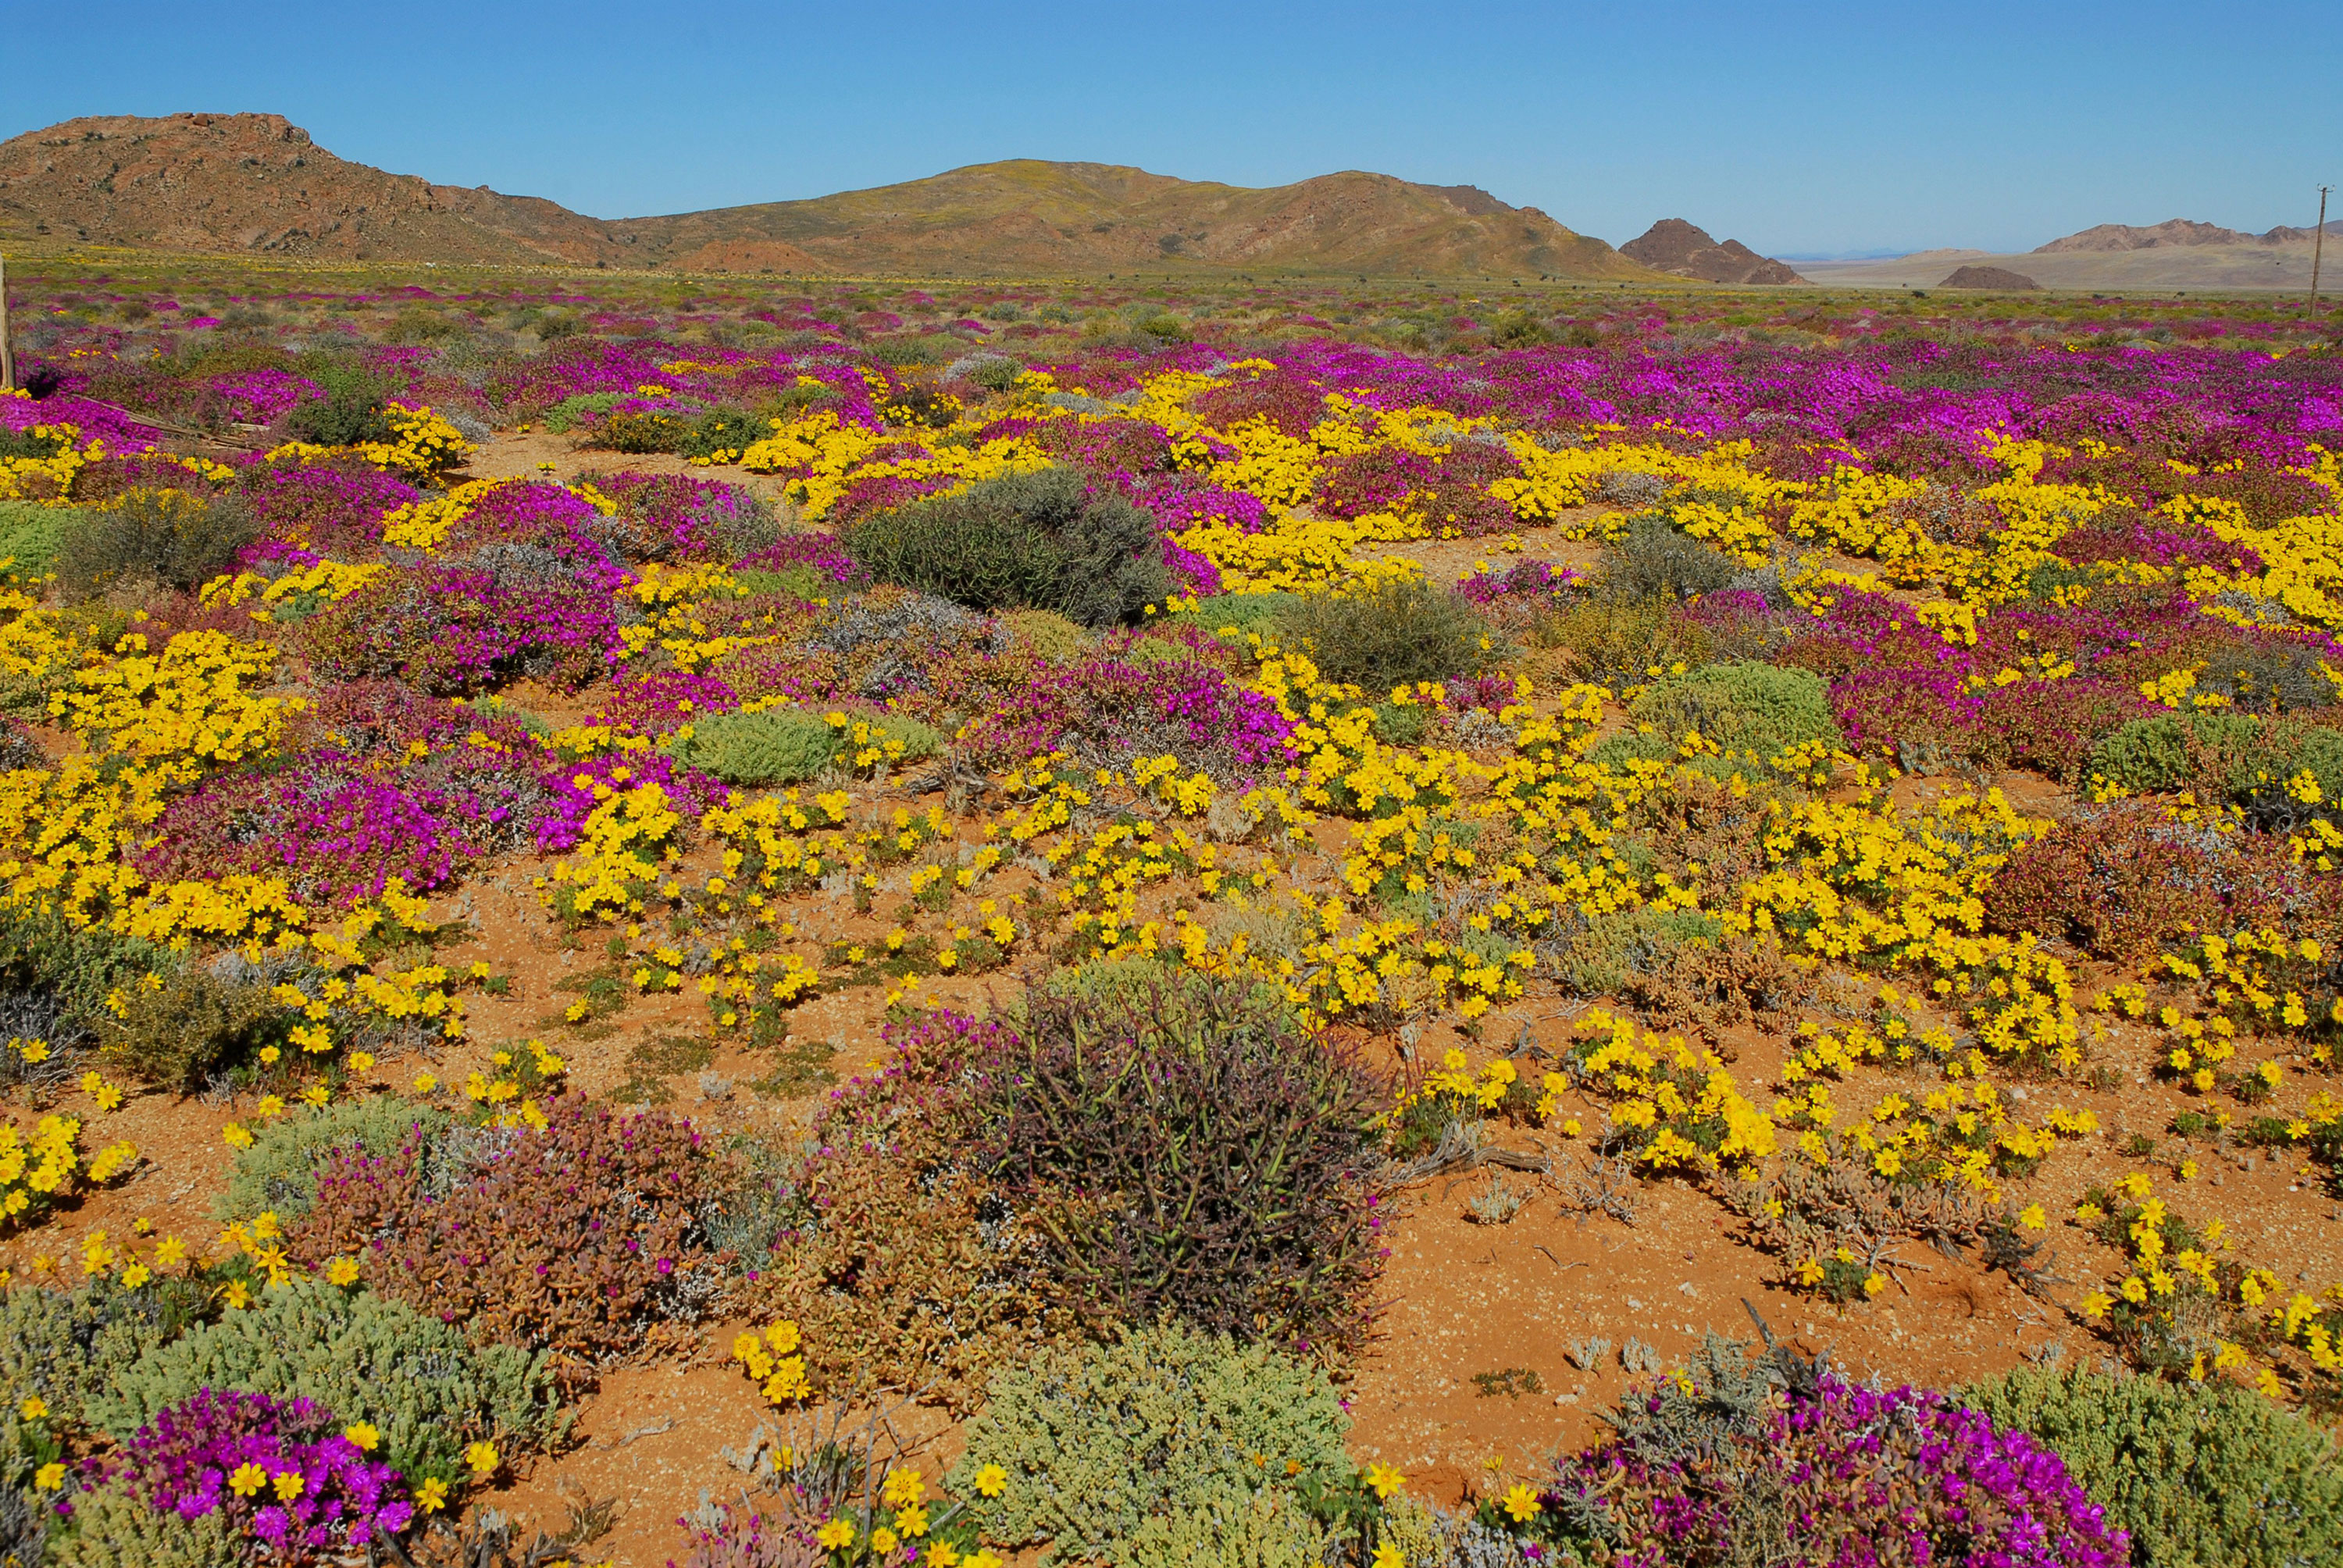 The Succulent Karoo in picture, A desert blooming with color